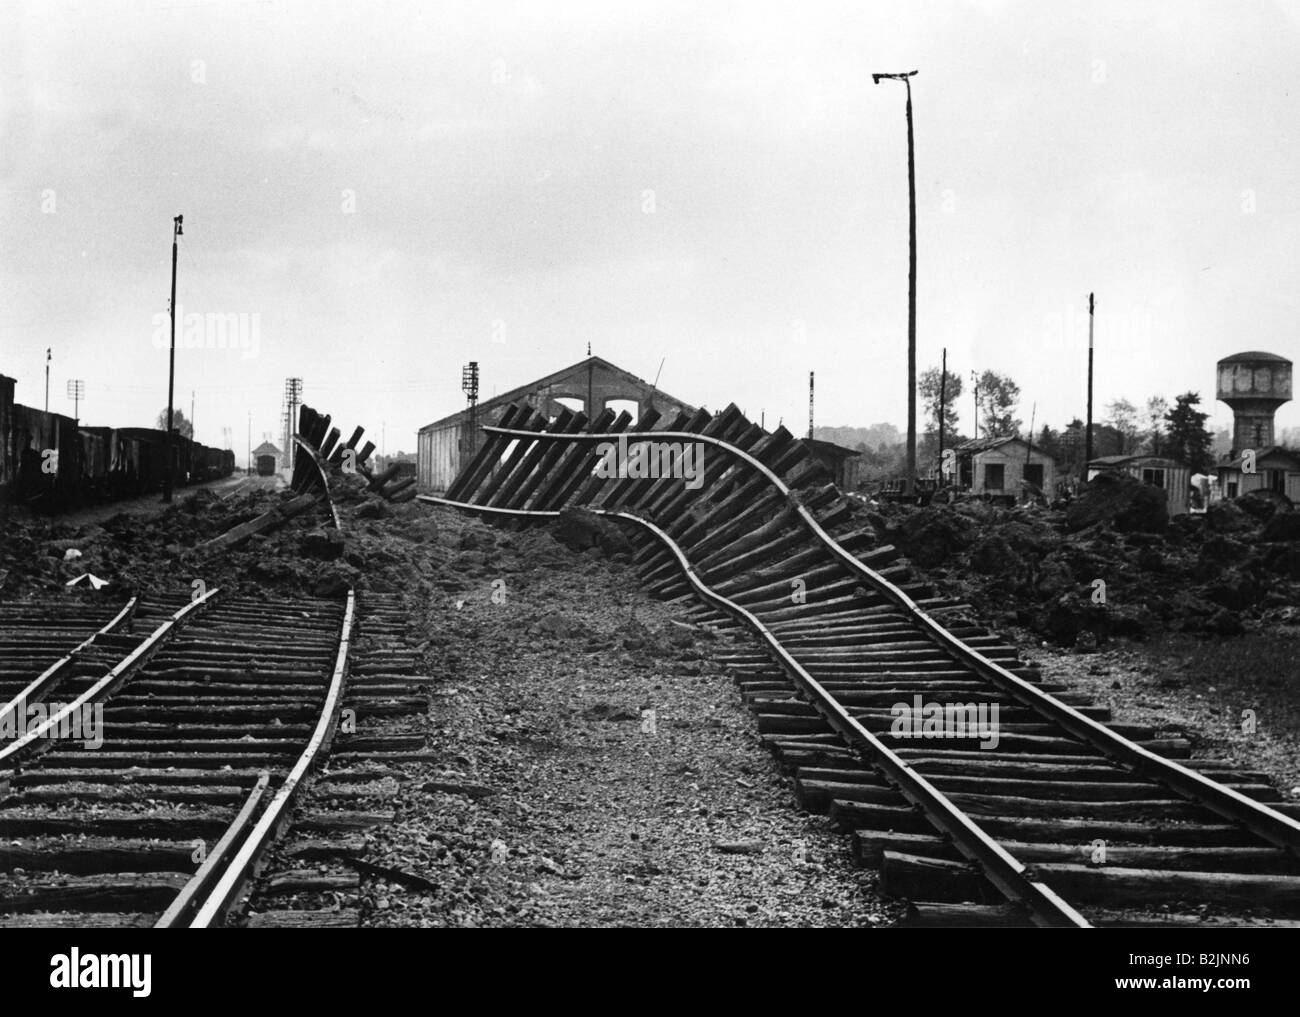 events, Second World War / WWII, France, destroyed rails after German air raid, 13.5.1940, Stock Photo